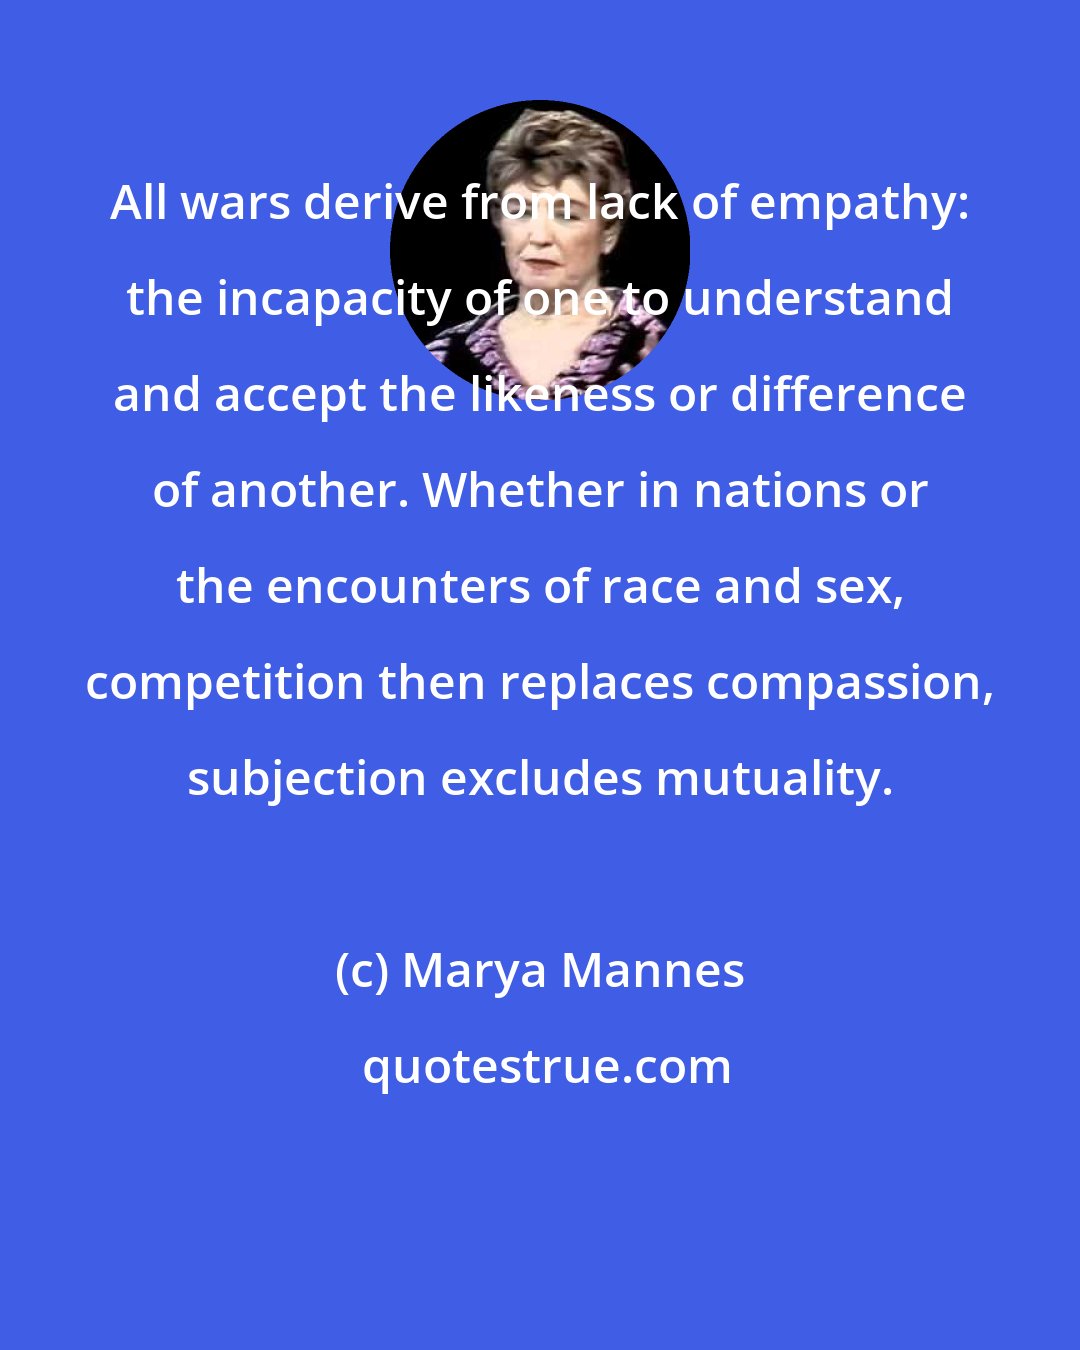 Marya Mannes: All wars derive from lack of empathy: the incapacity of one to understand and accept the likeness or difference of another. Whether in nations or the encounters of race and sex, competition then replaces compassion, subjection excludes mutuality.